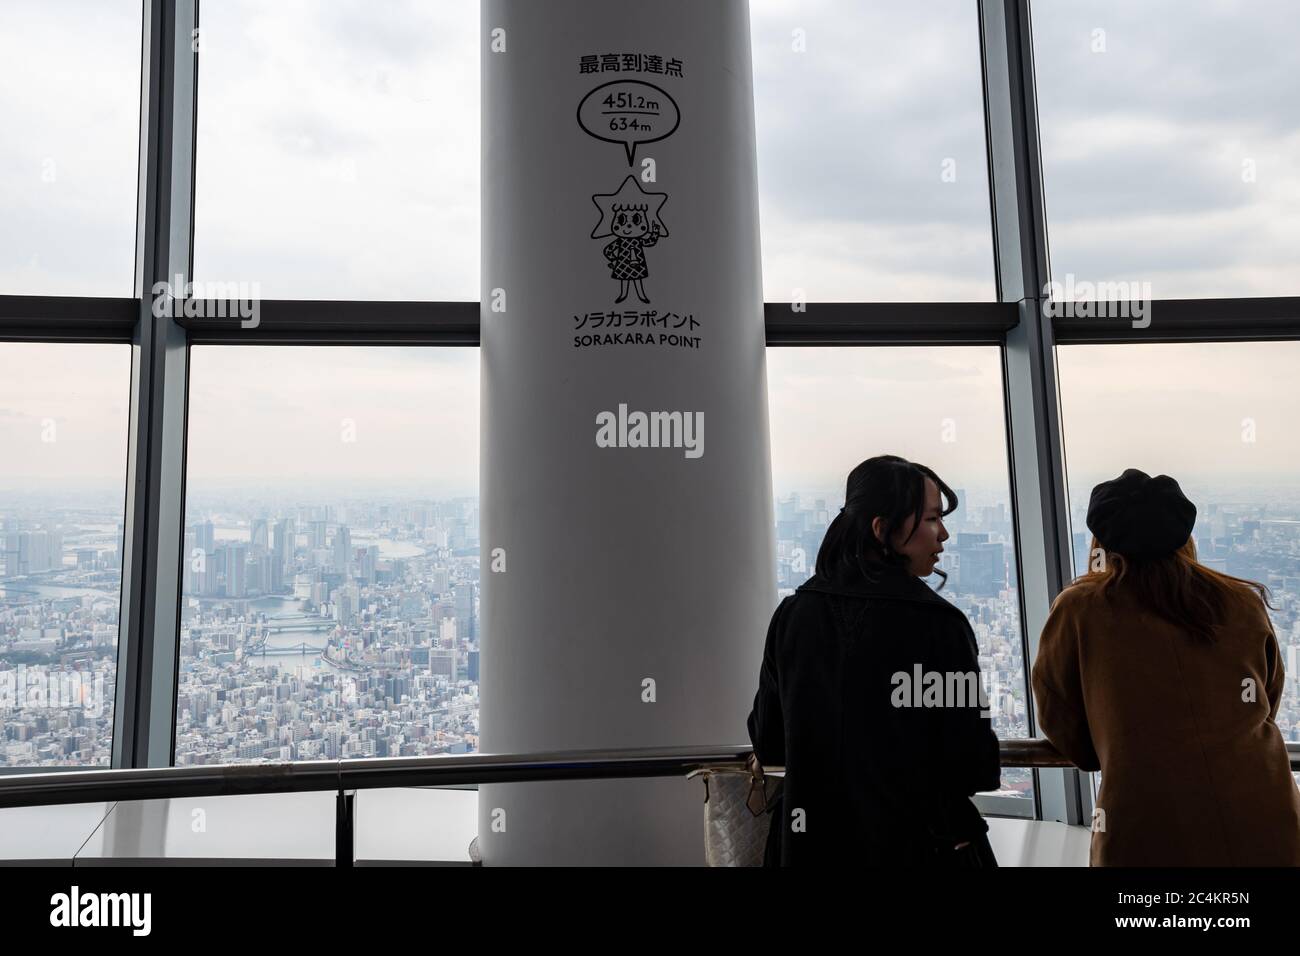 The Sorakara Point (450th floor - the highest point at 451,2 mt from ground floor) and people observing the panorama - Tokyo Skytree Observation Deck. Stock Photo